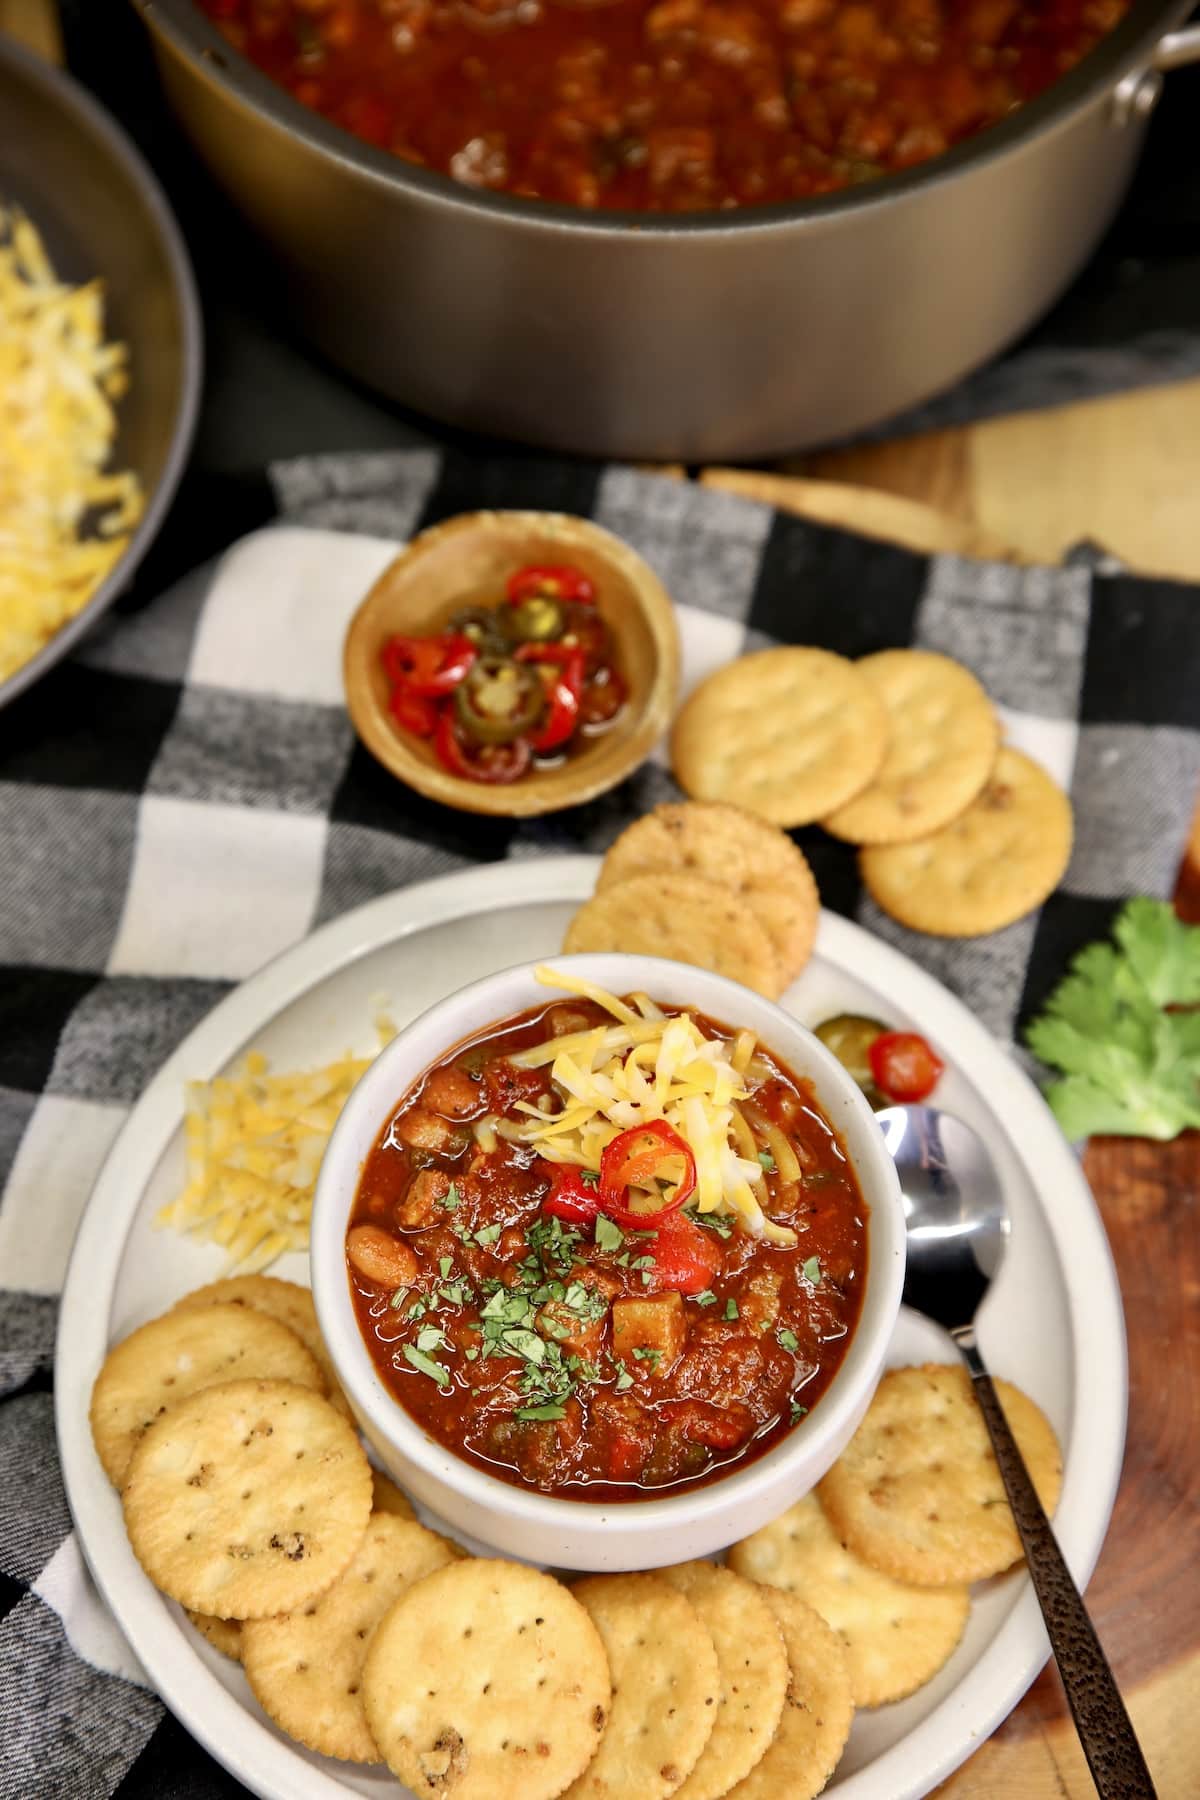 Bowl of chili on a plate with crackers.